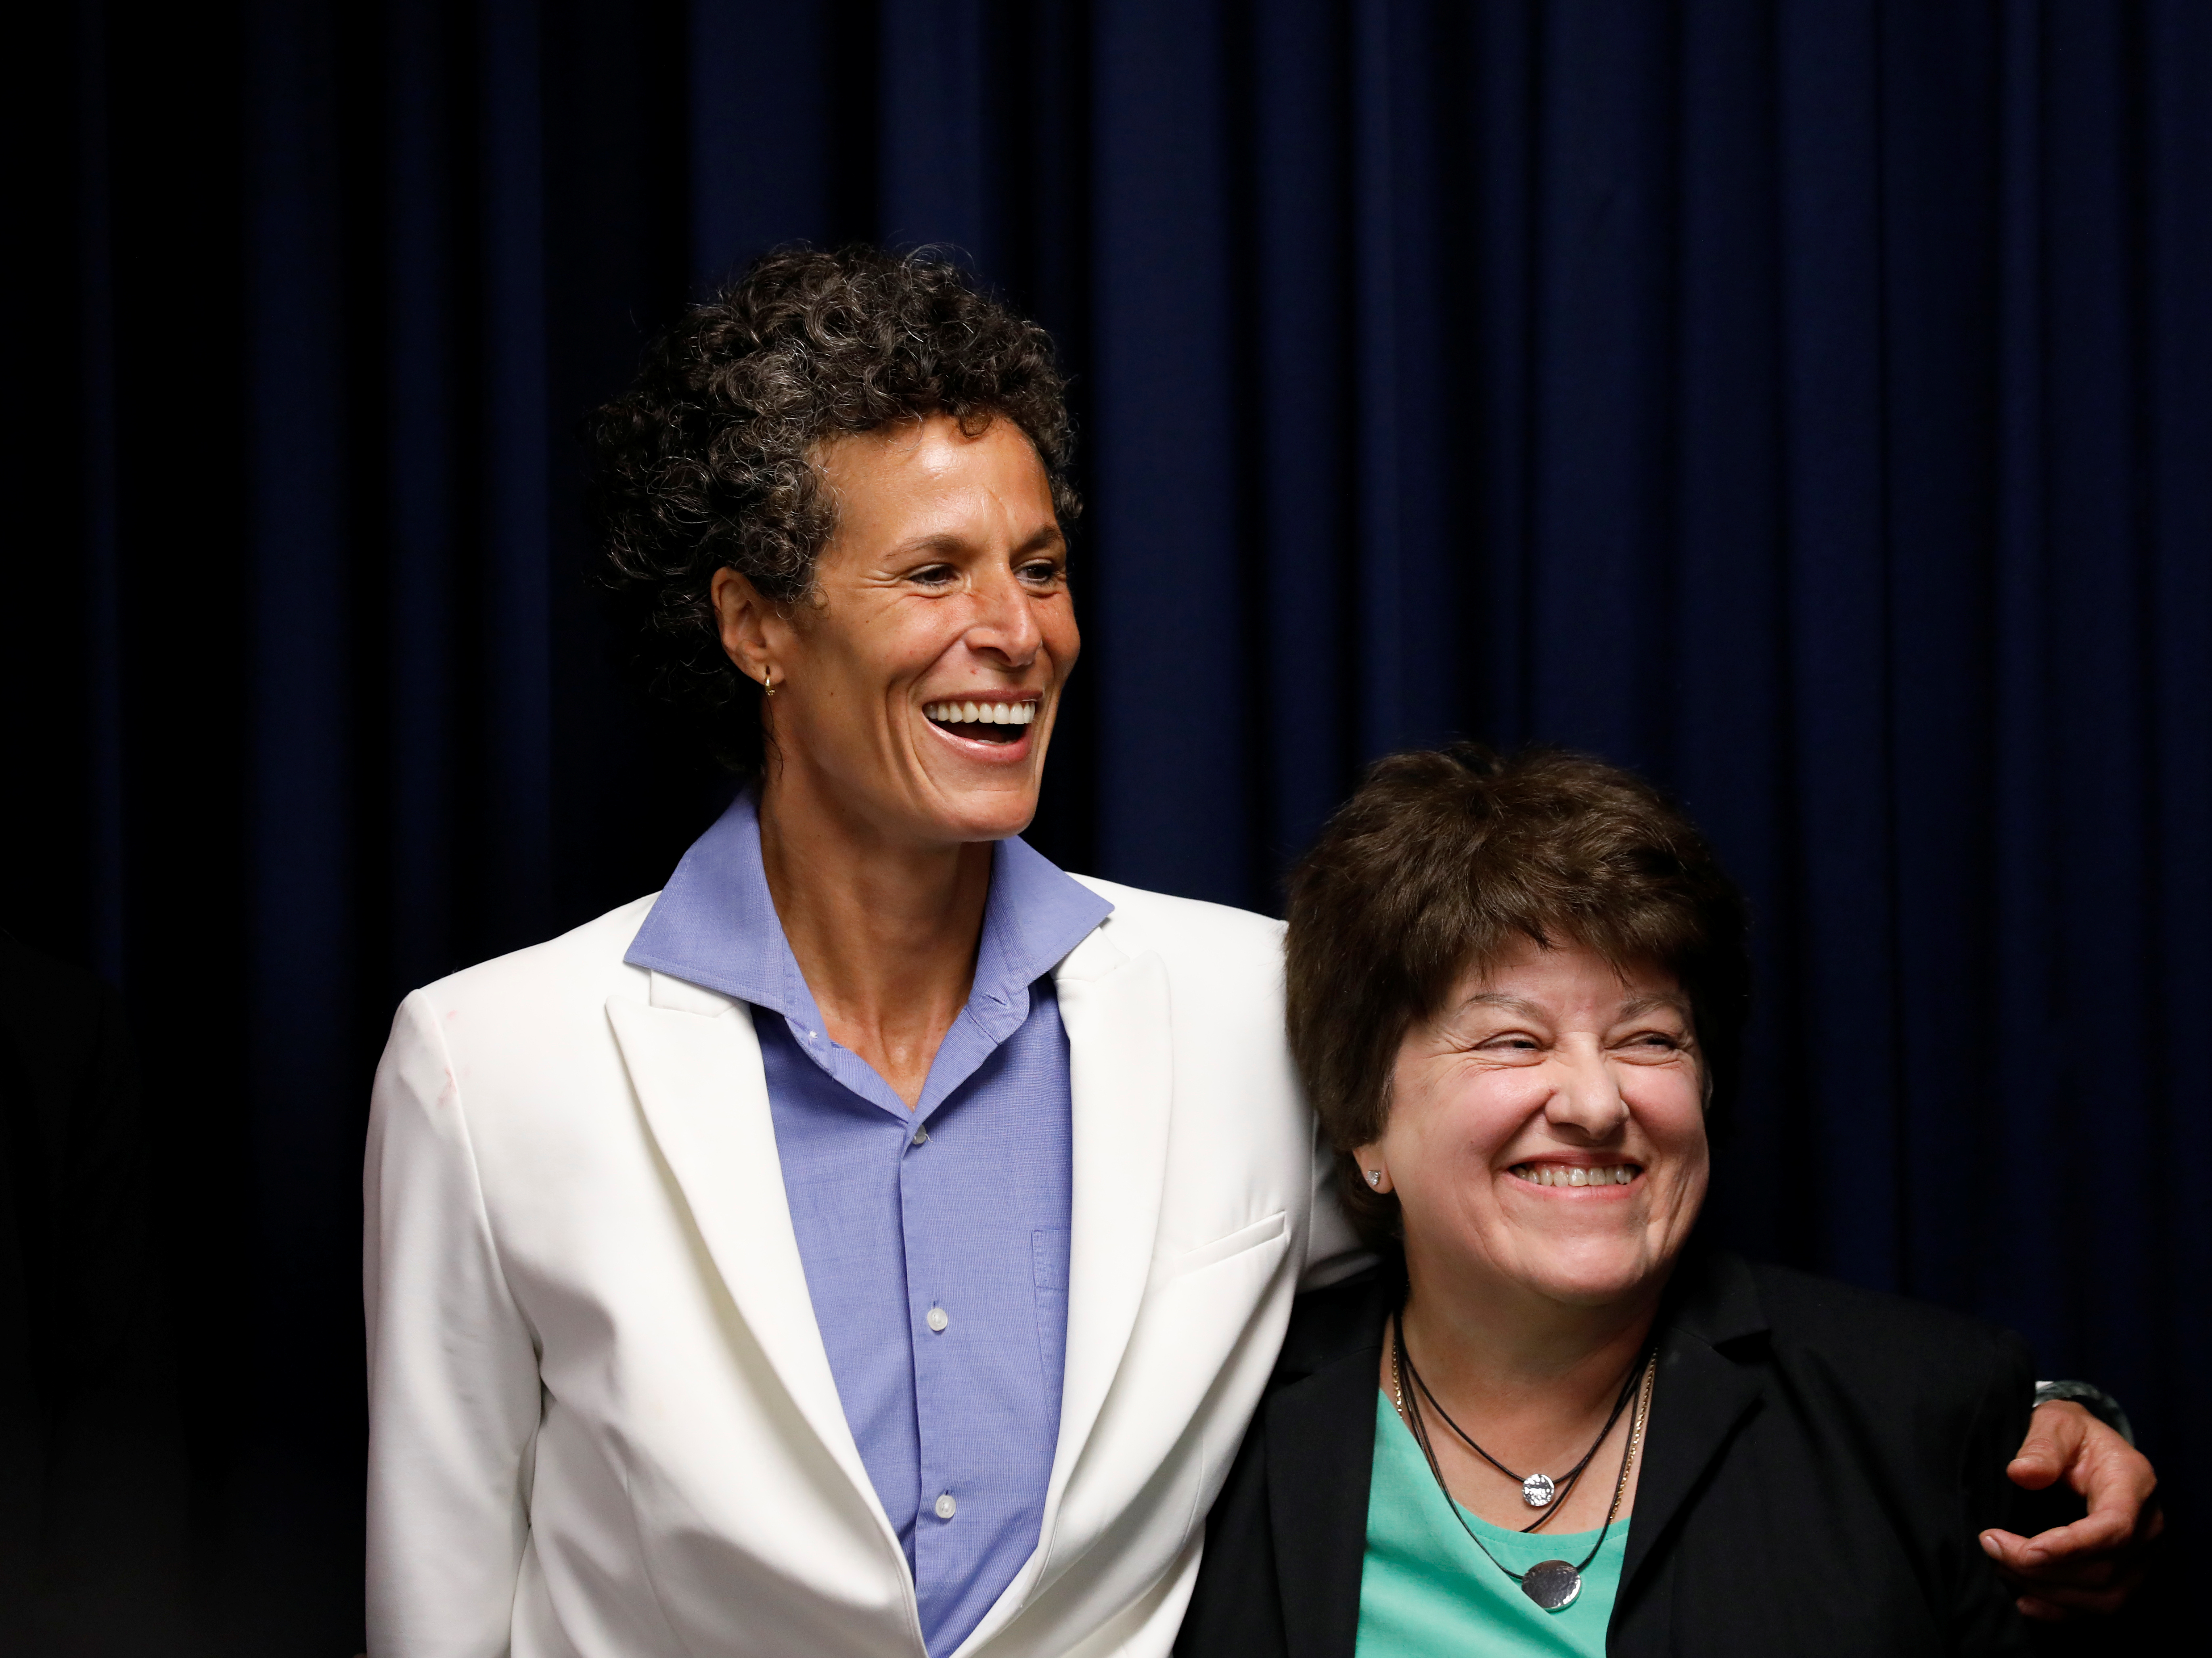 Bill Cosby accuser Andrea Constand embraces lawyer Dolores Troiani during a news conference after a jury convicted actor and comedian Bill Cosby for sexual assault during a retrial in Norristown, Pennsylvania, U.S., April 26, 2018. REUTERS/Brendan McDermid